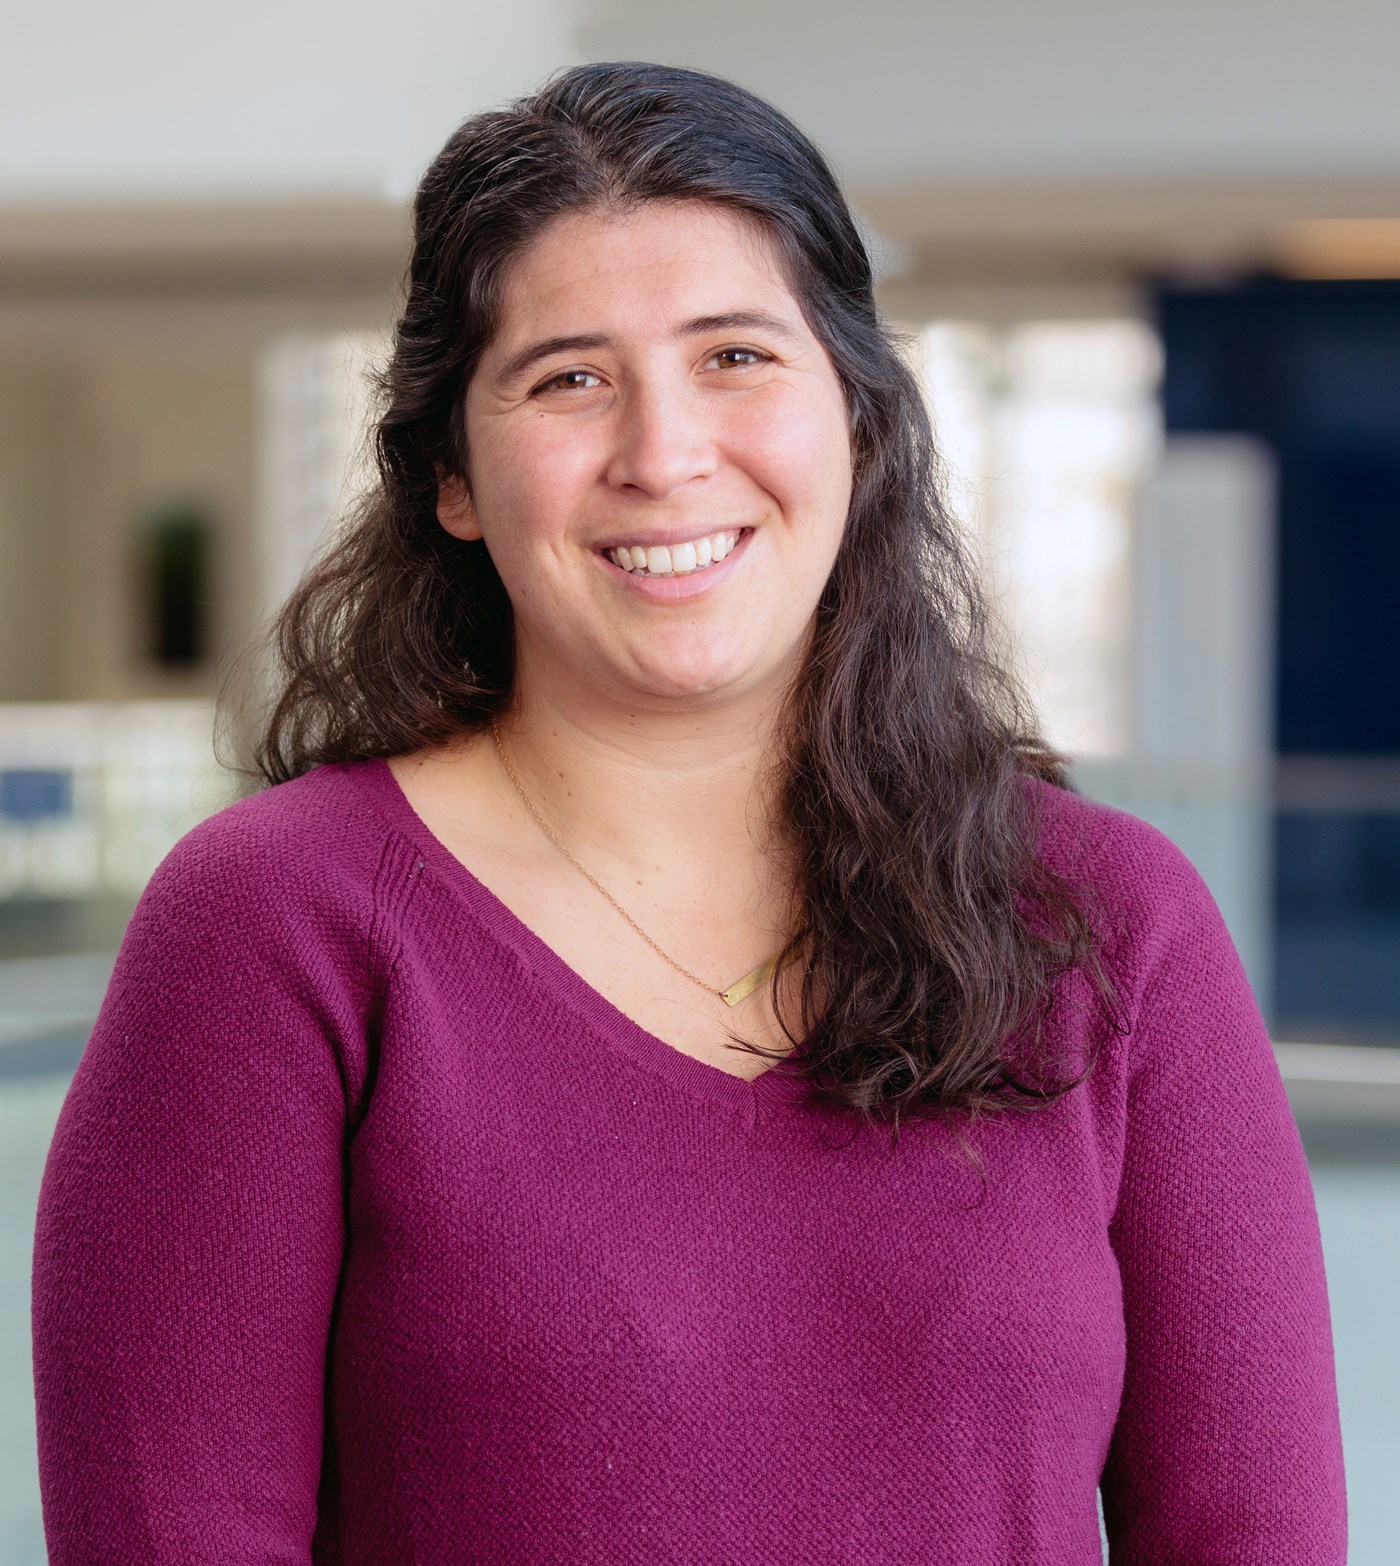 Larissa Gaiais is an Assistant Professor in the Psychology Department at UMass Lowell.